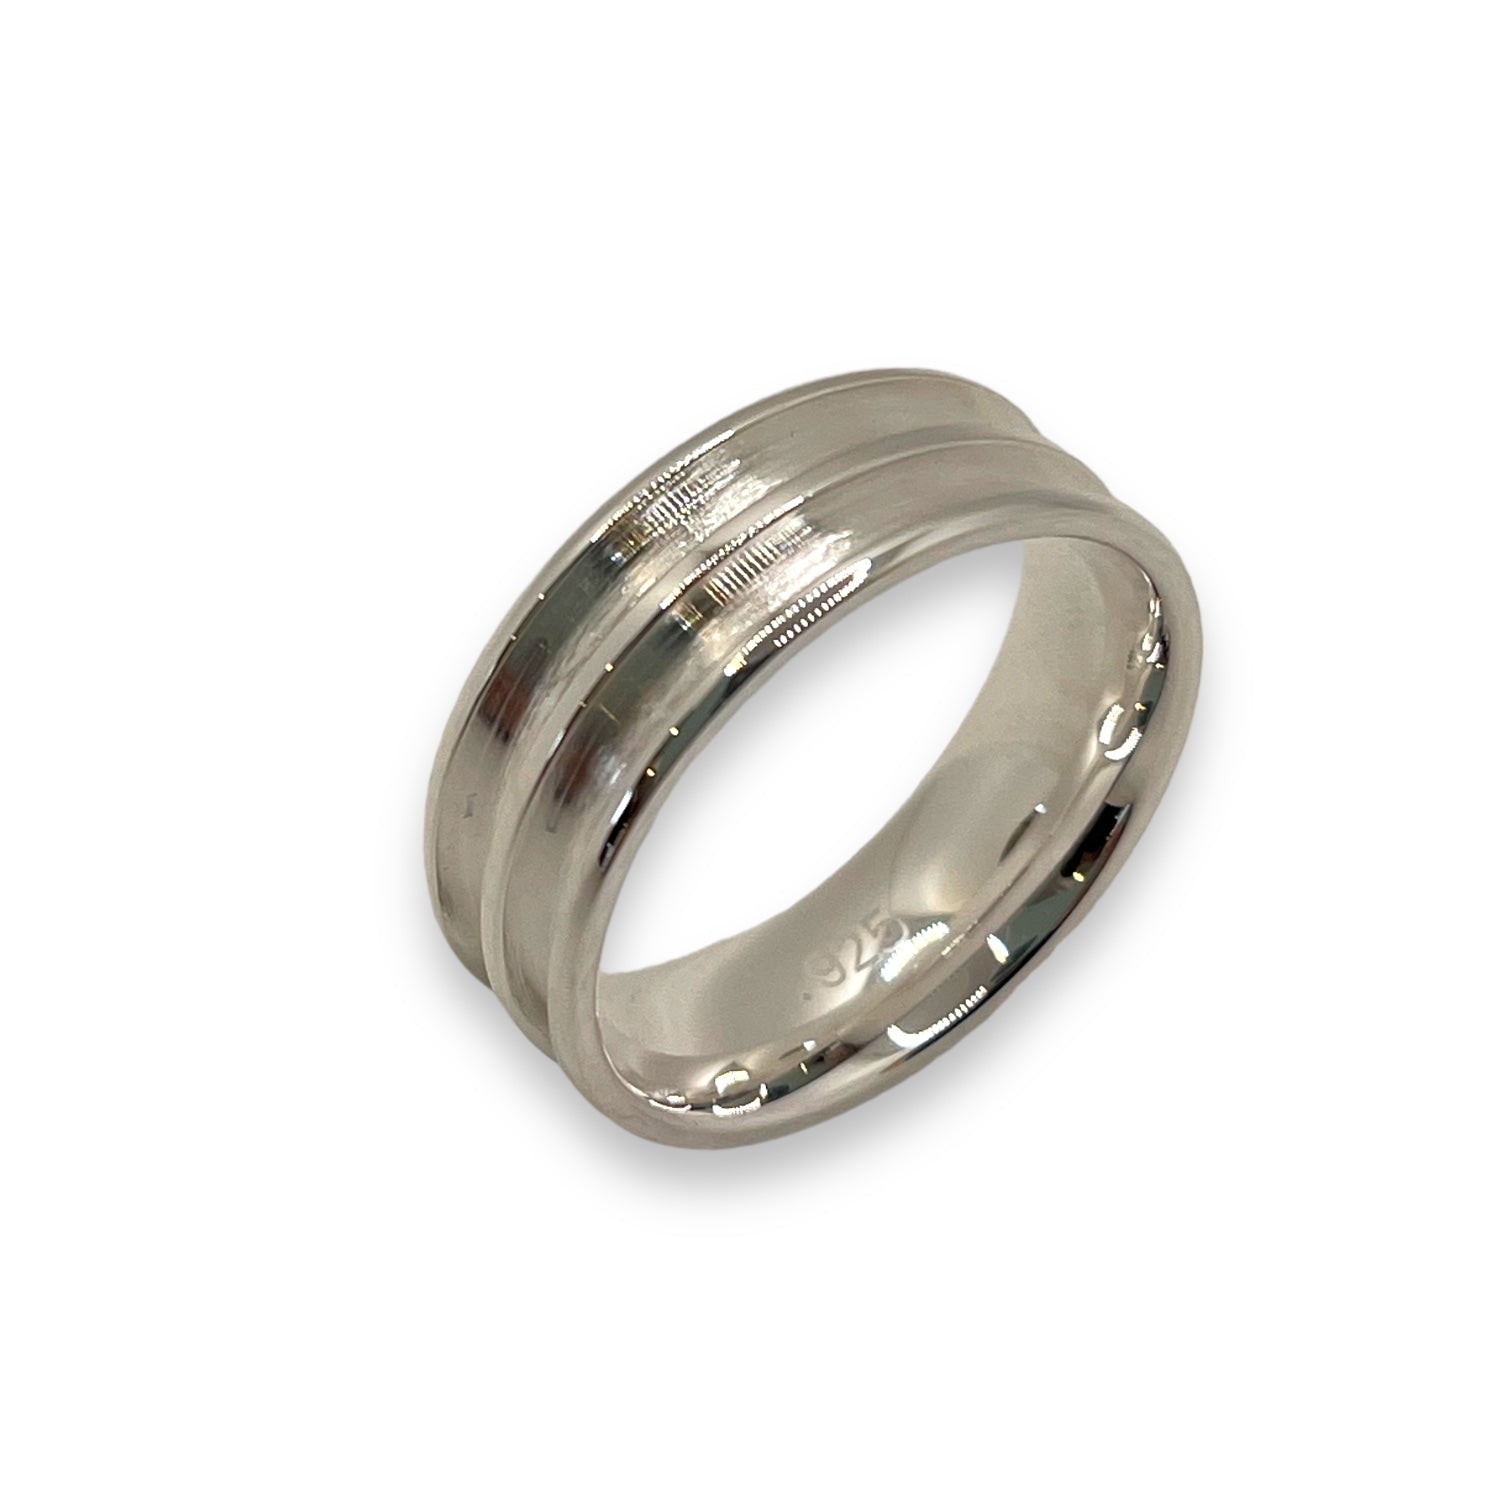 .925 sterling silver double channel ring core